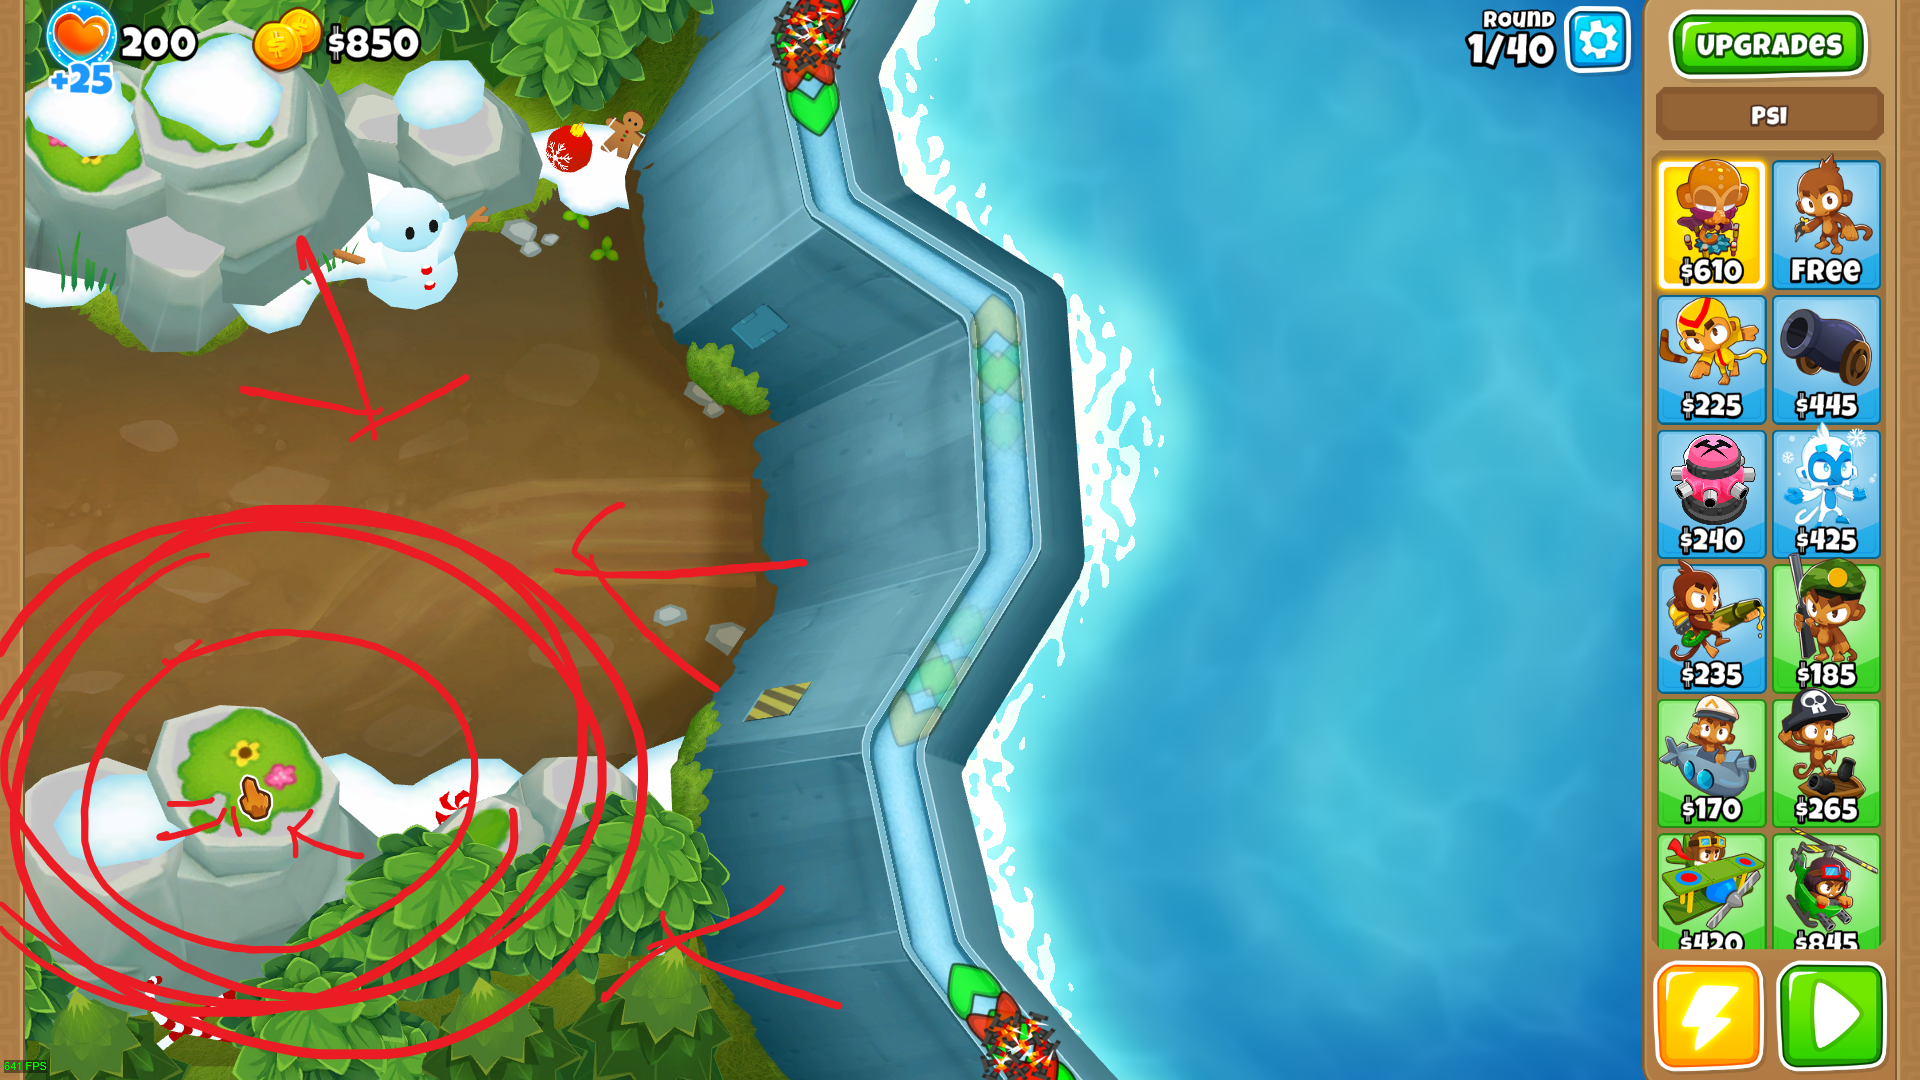 Steam Community :: Guide :: Bloons TD 6 Easter Eggs